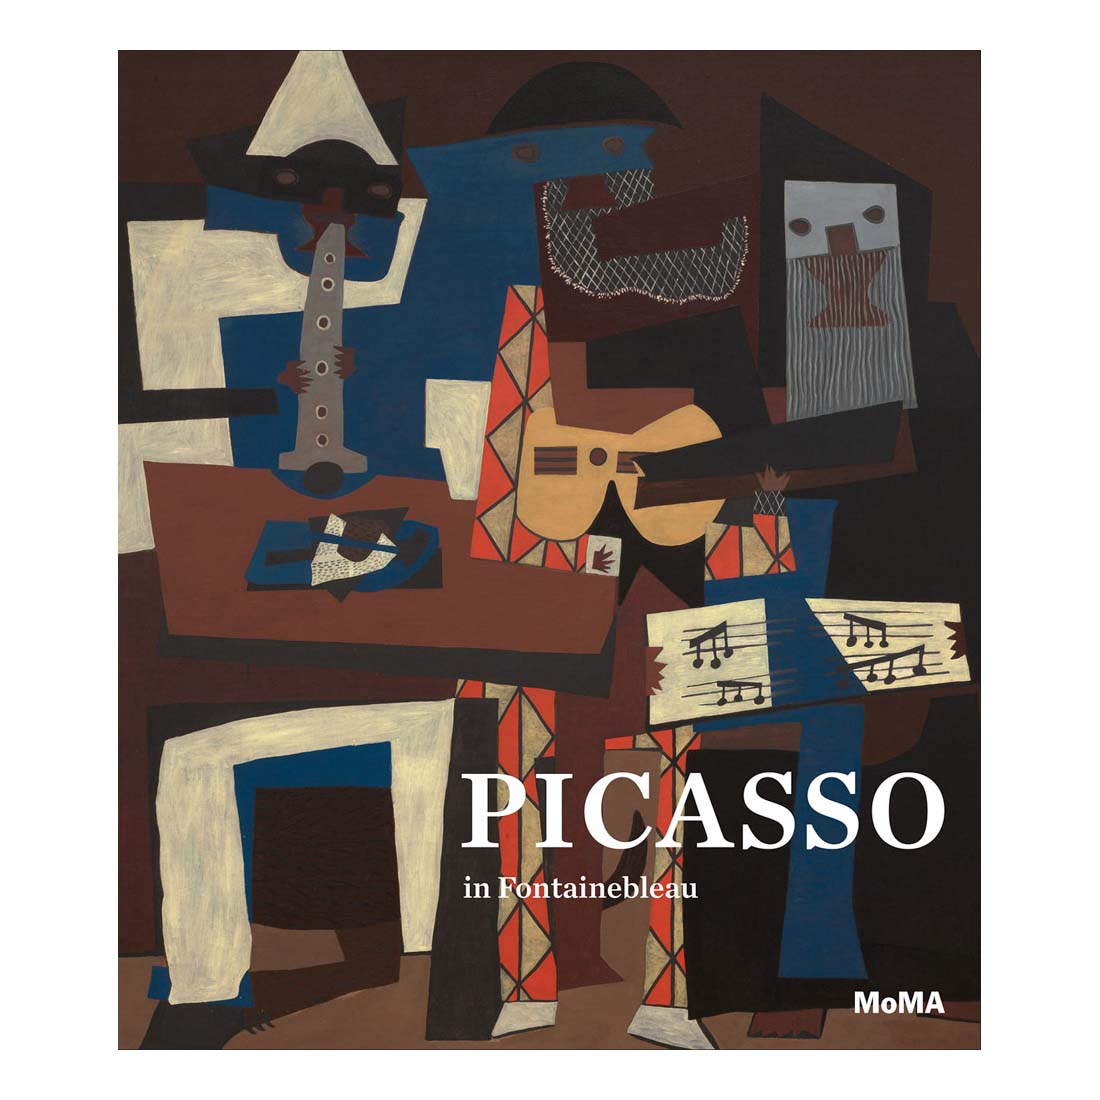 Picasso at Fontainebleau